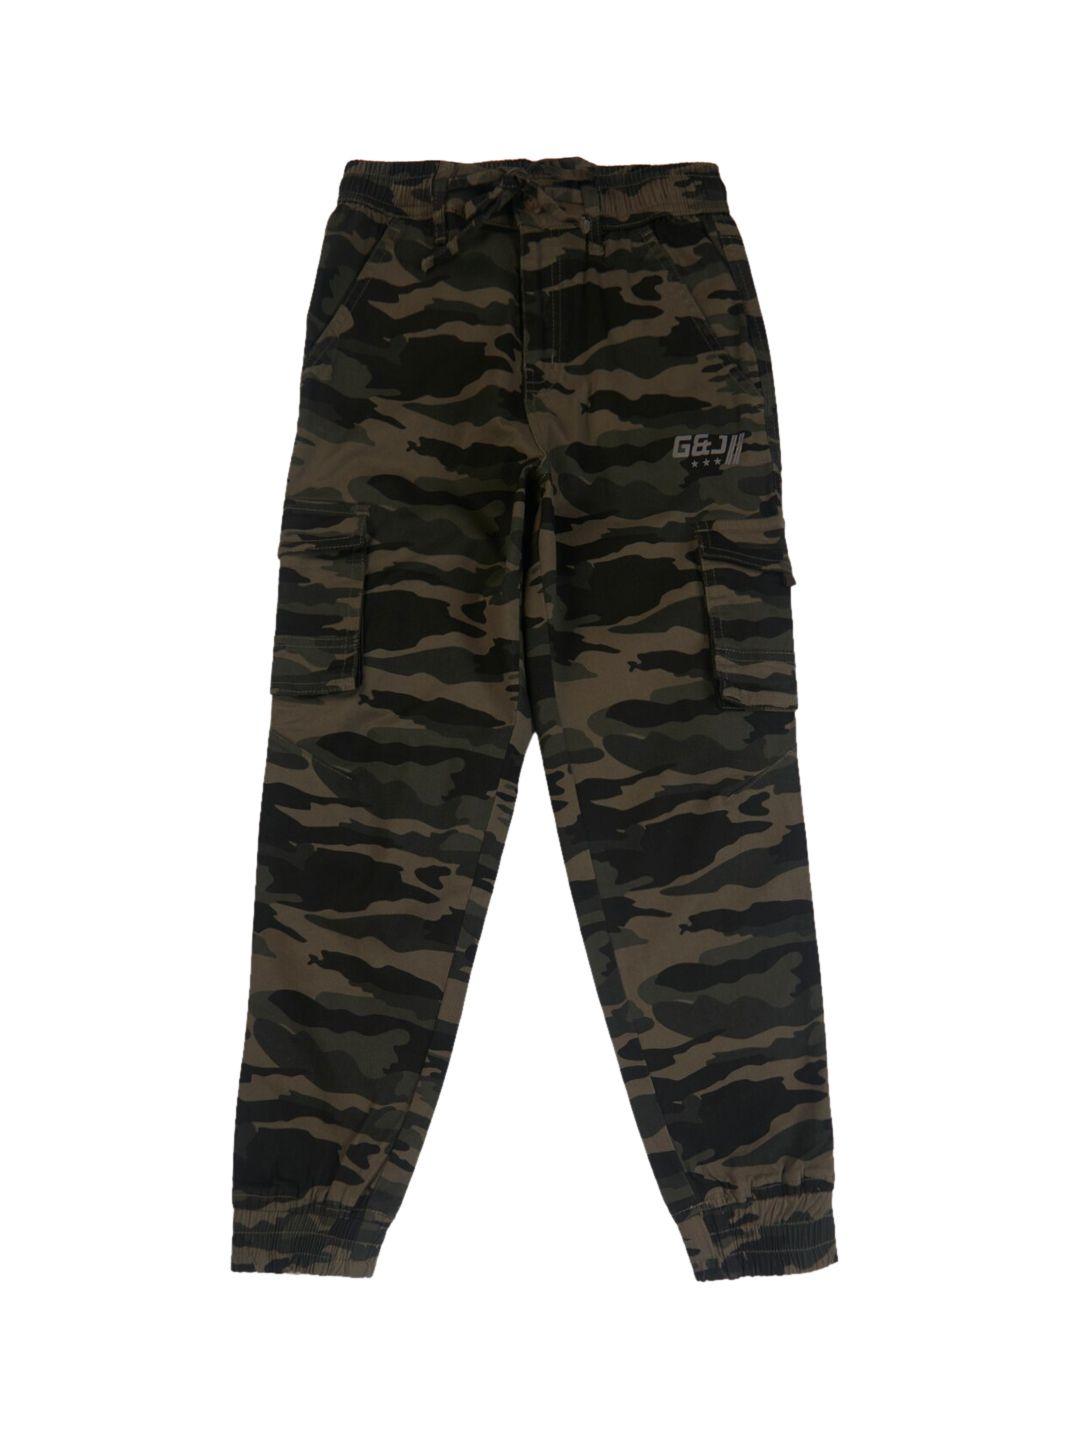 gini-and-jony-boys-camouflage-printed-cargos-cotton-trousers